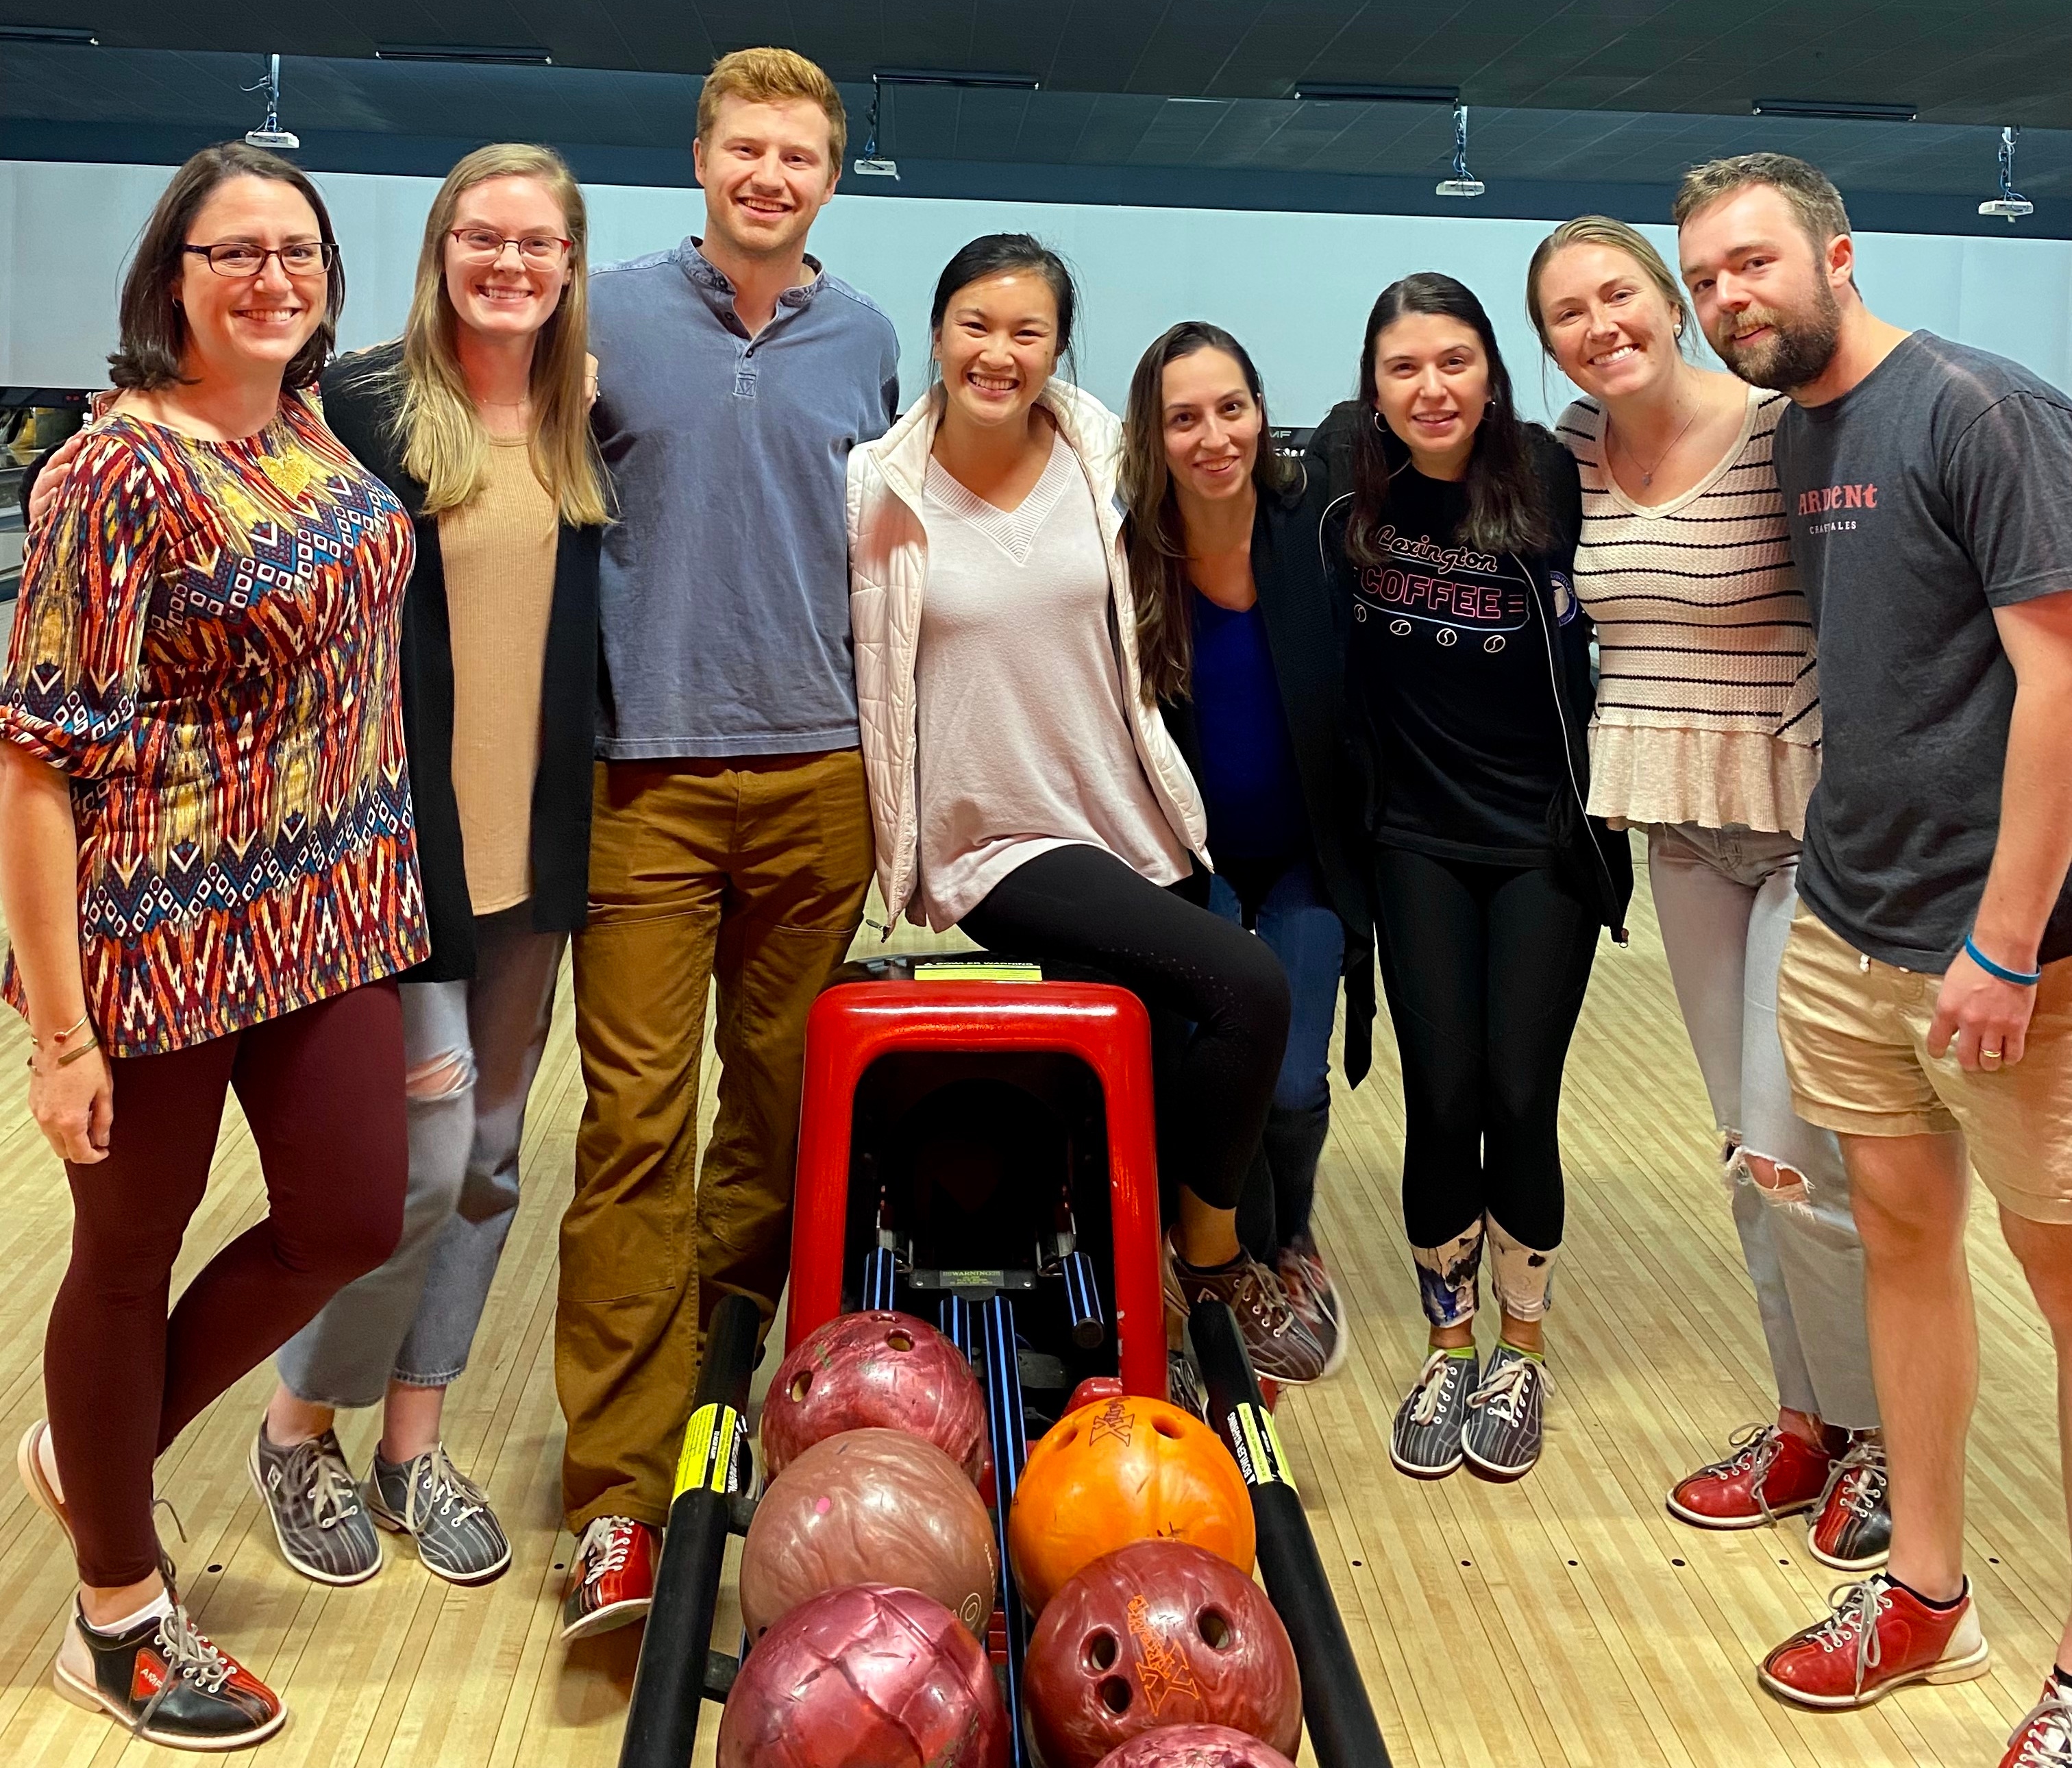 Residents pose for a group photo at the bowling alley